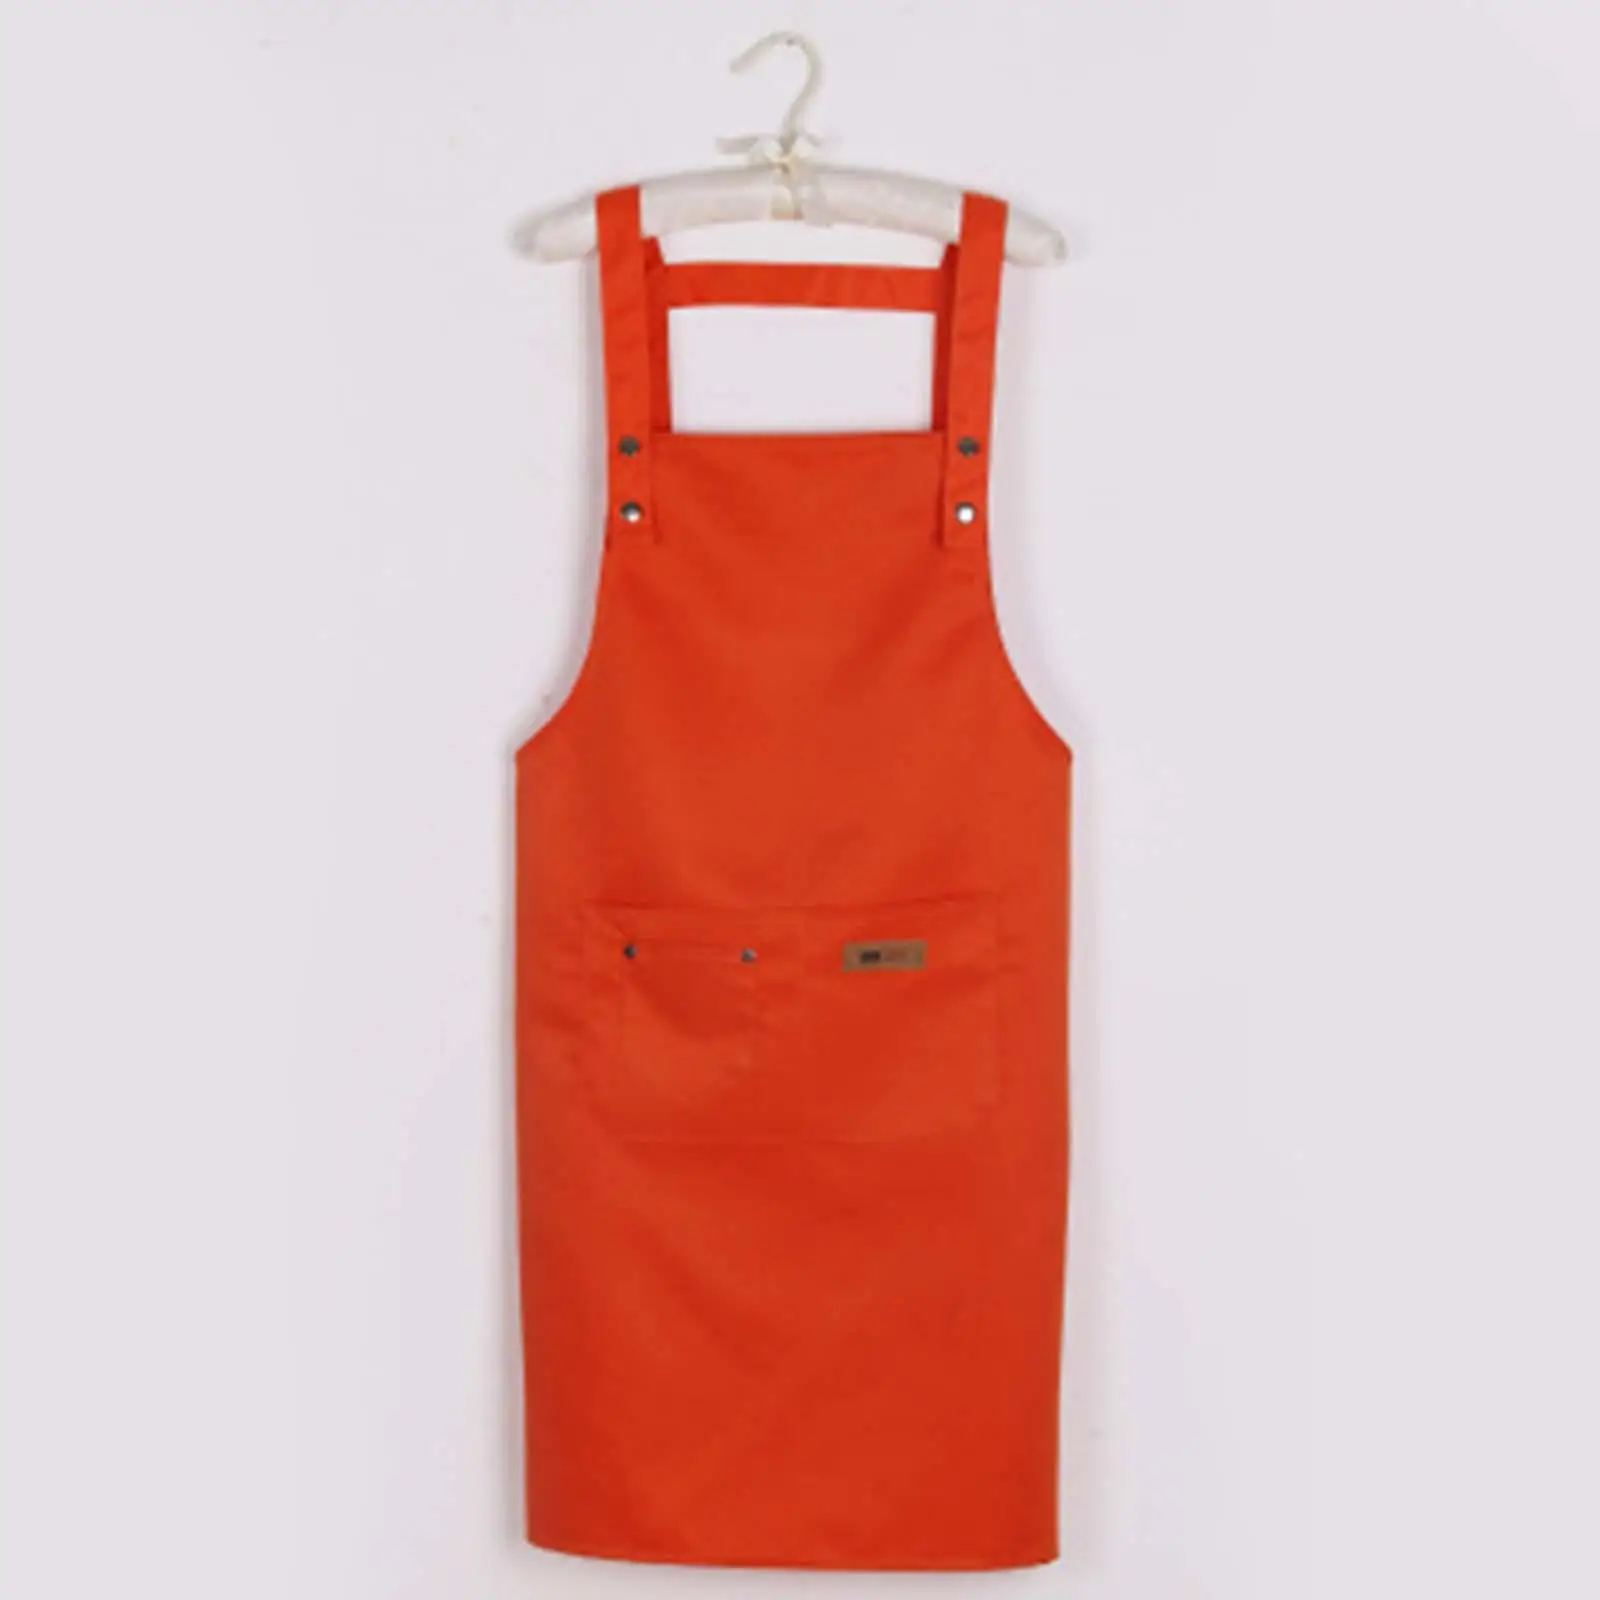 Adjustable Apron with Pockets Kitchen Aprons for Cooking Grilling Painting Drawing